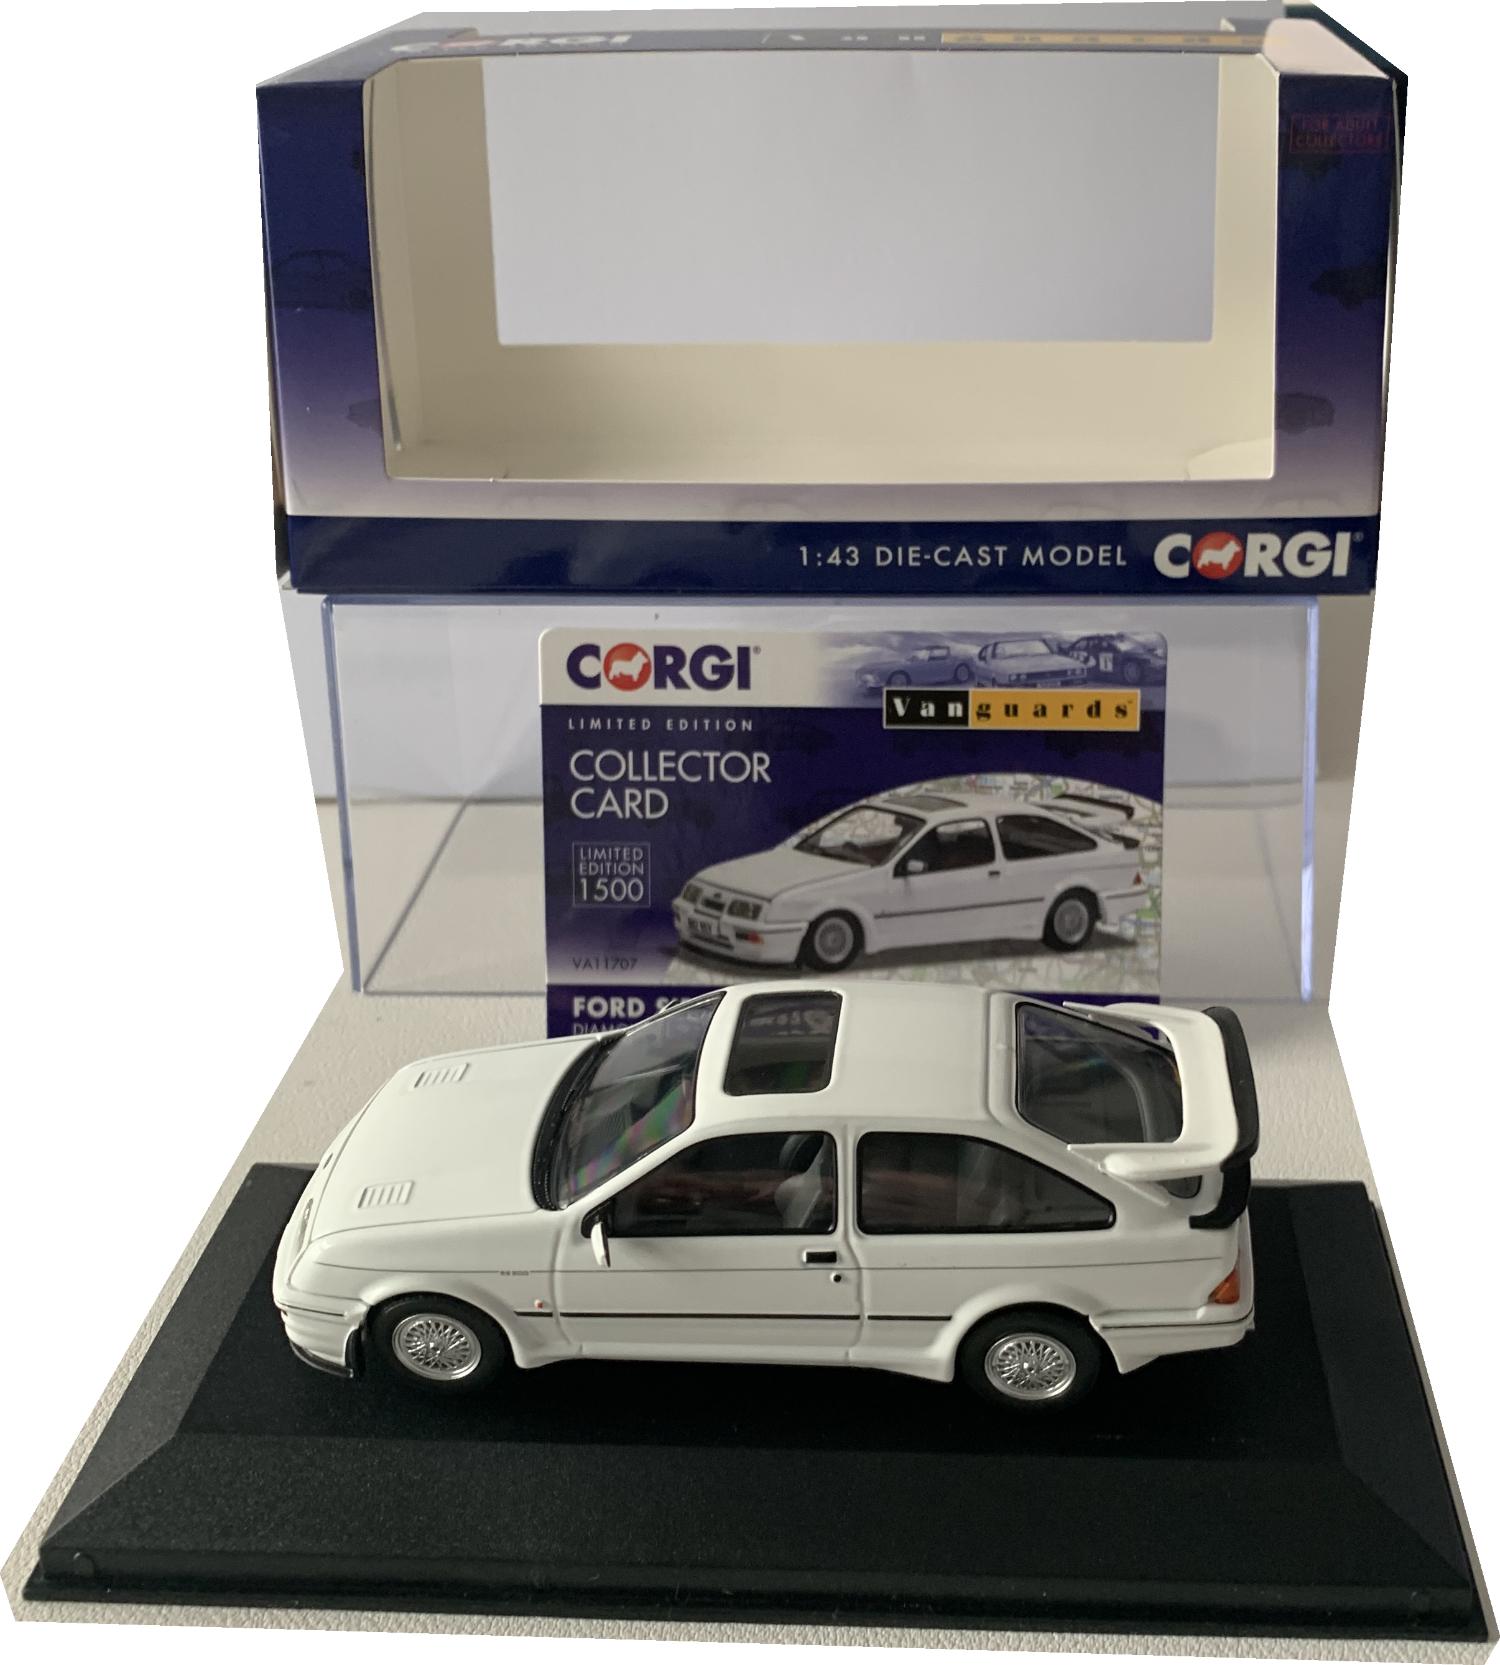 One of a Limited Edition of 1,500 pieces and includes a Limited Edition Collector Card.  Model presented in Corgi Vanguards packaging